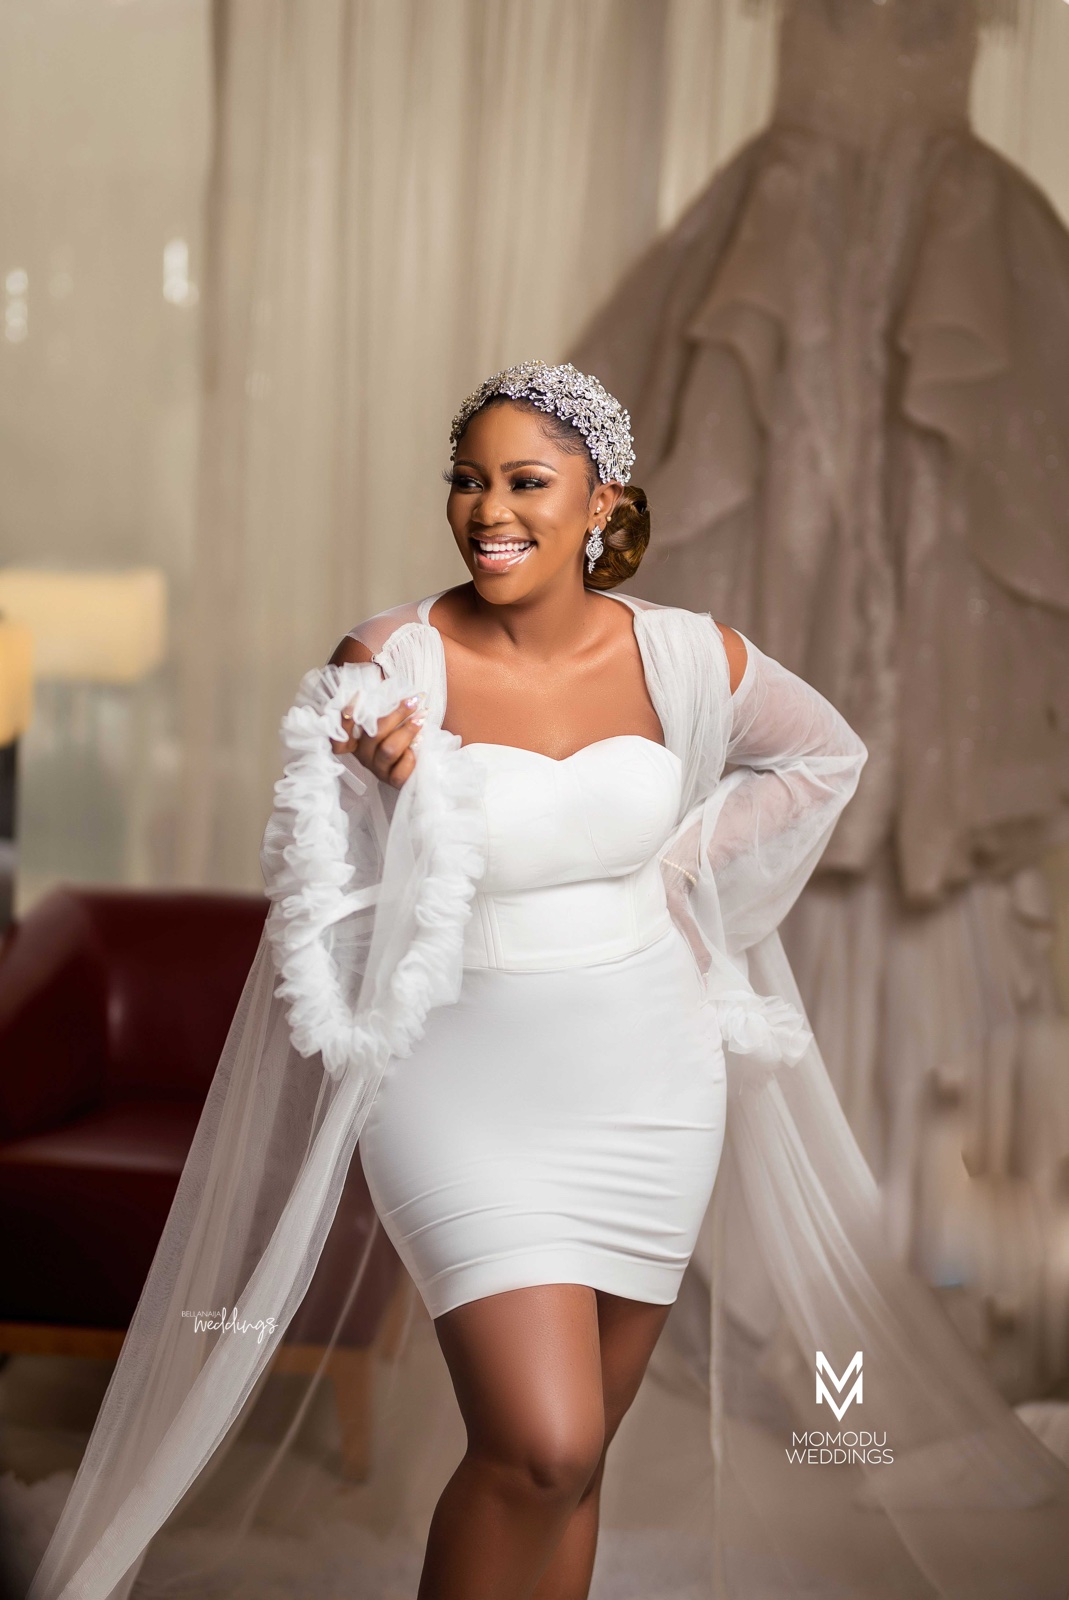 Yes to Forever with You! See Adaora & Chisolu's Exciting Wedding